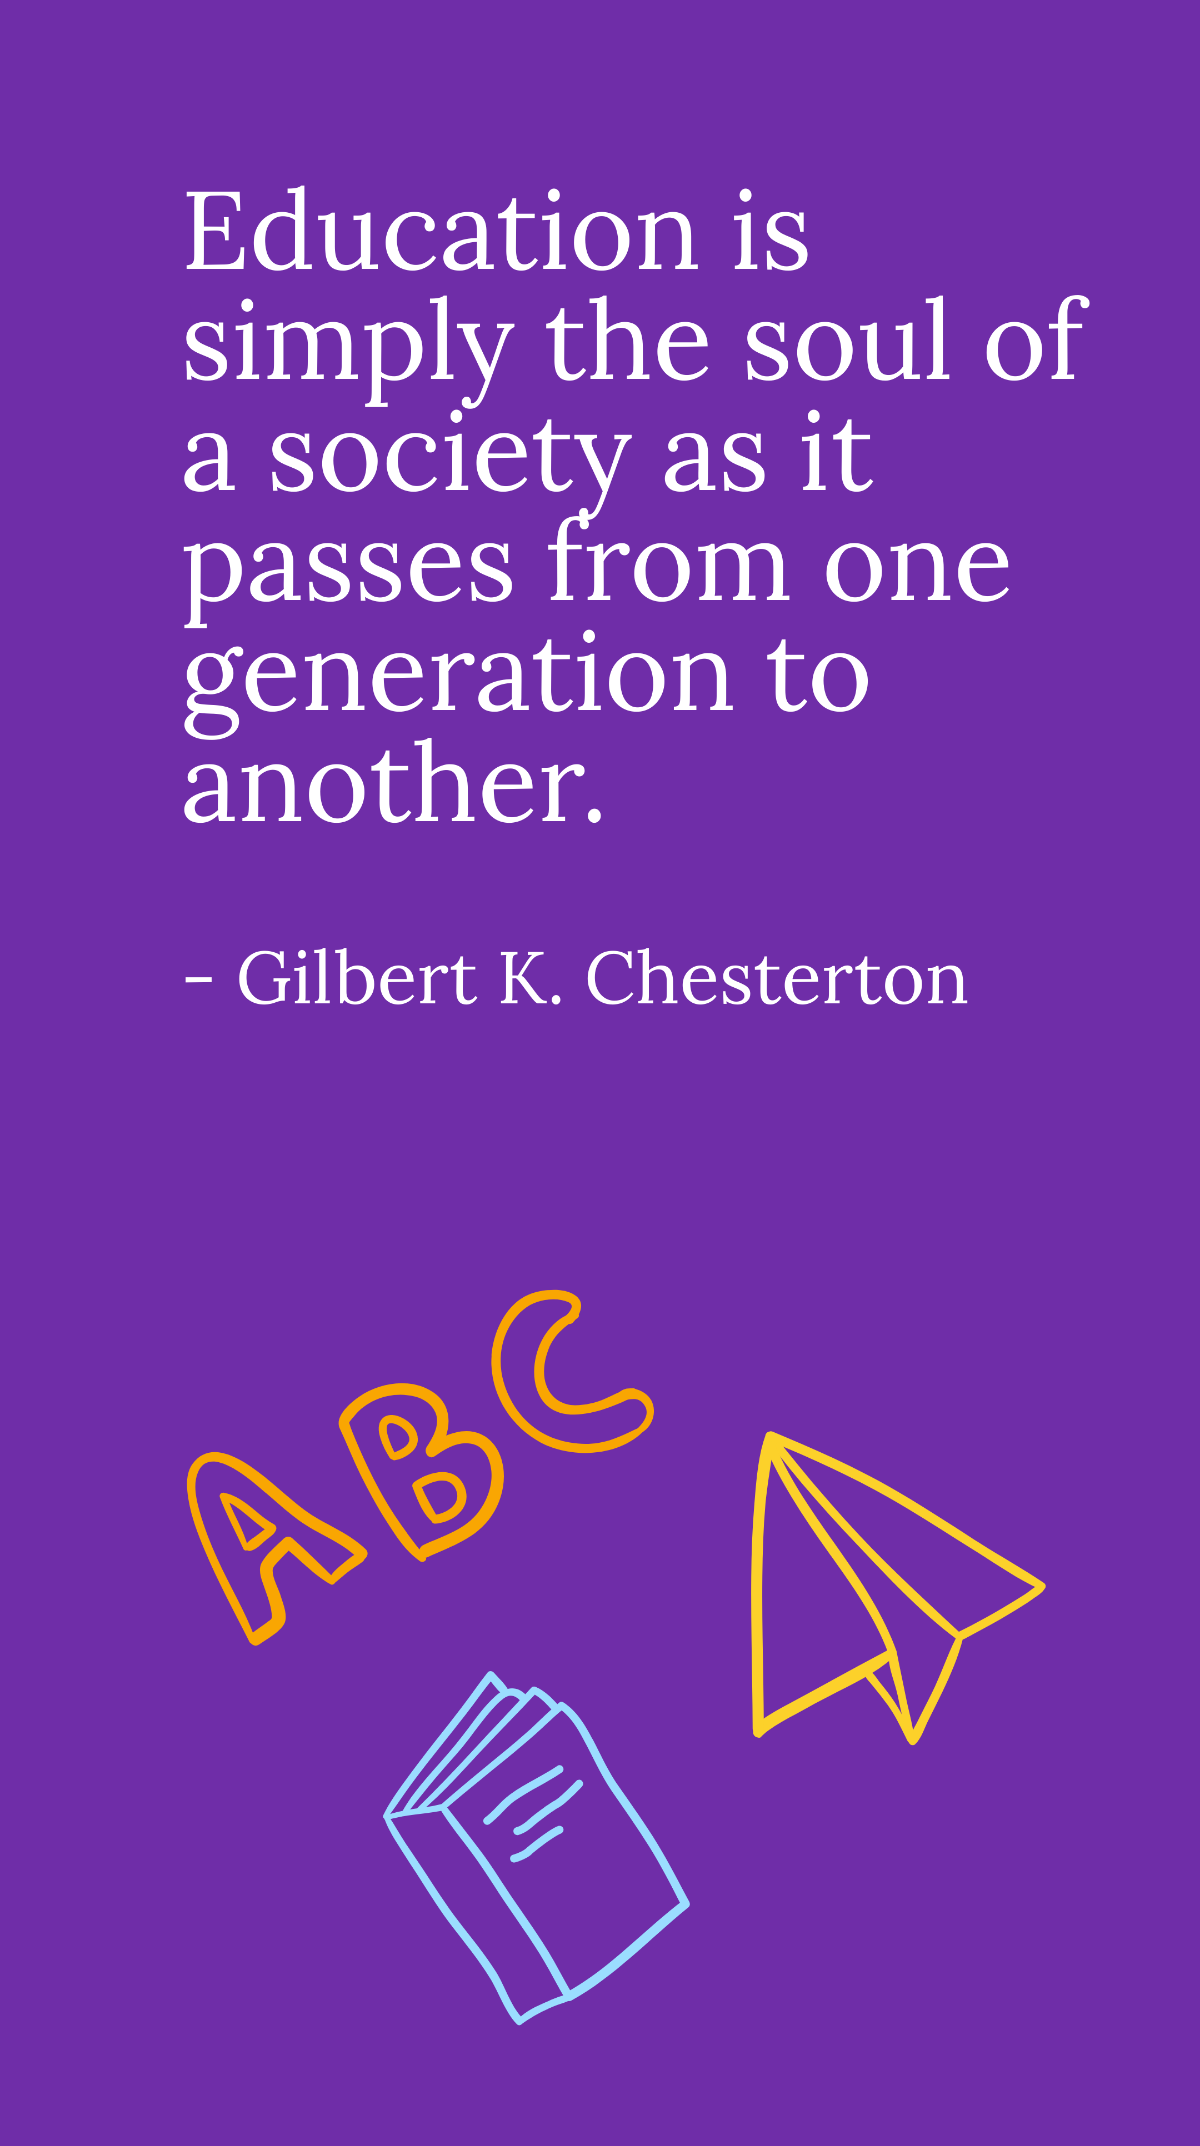 Gilbert K. Chesterton - Education is simply the soul of a society as it passes from one generation to another.